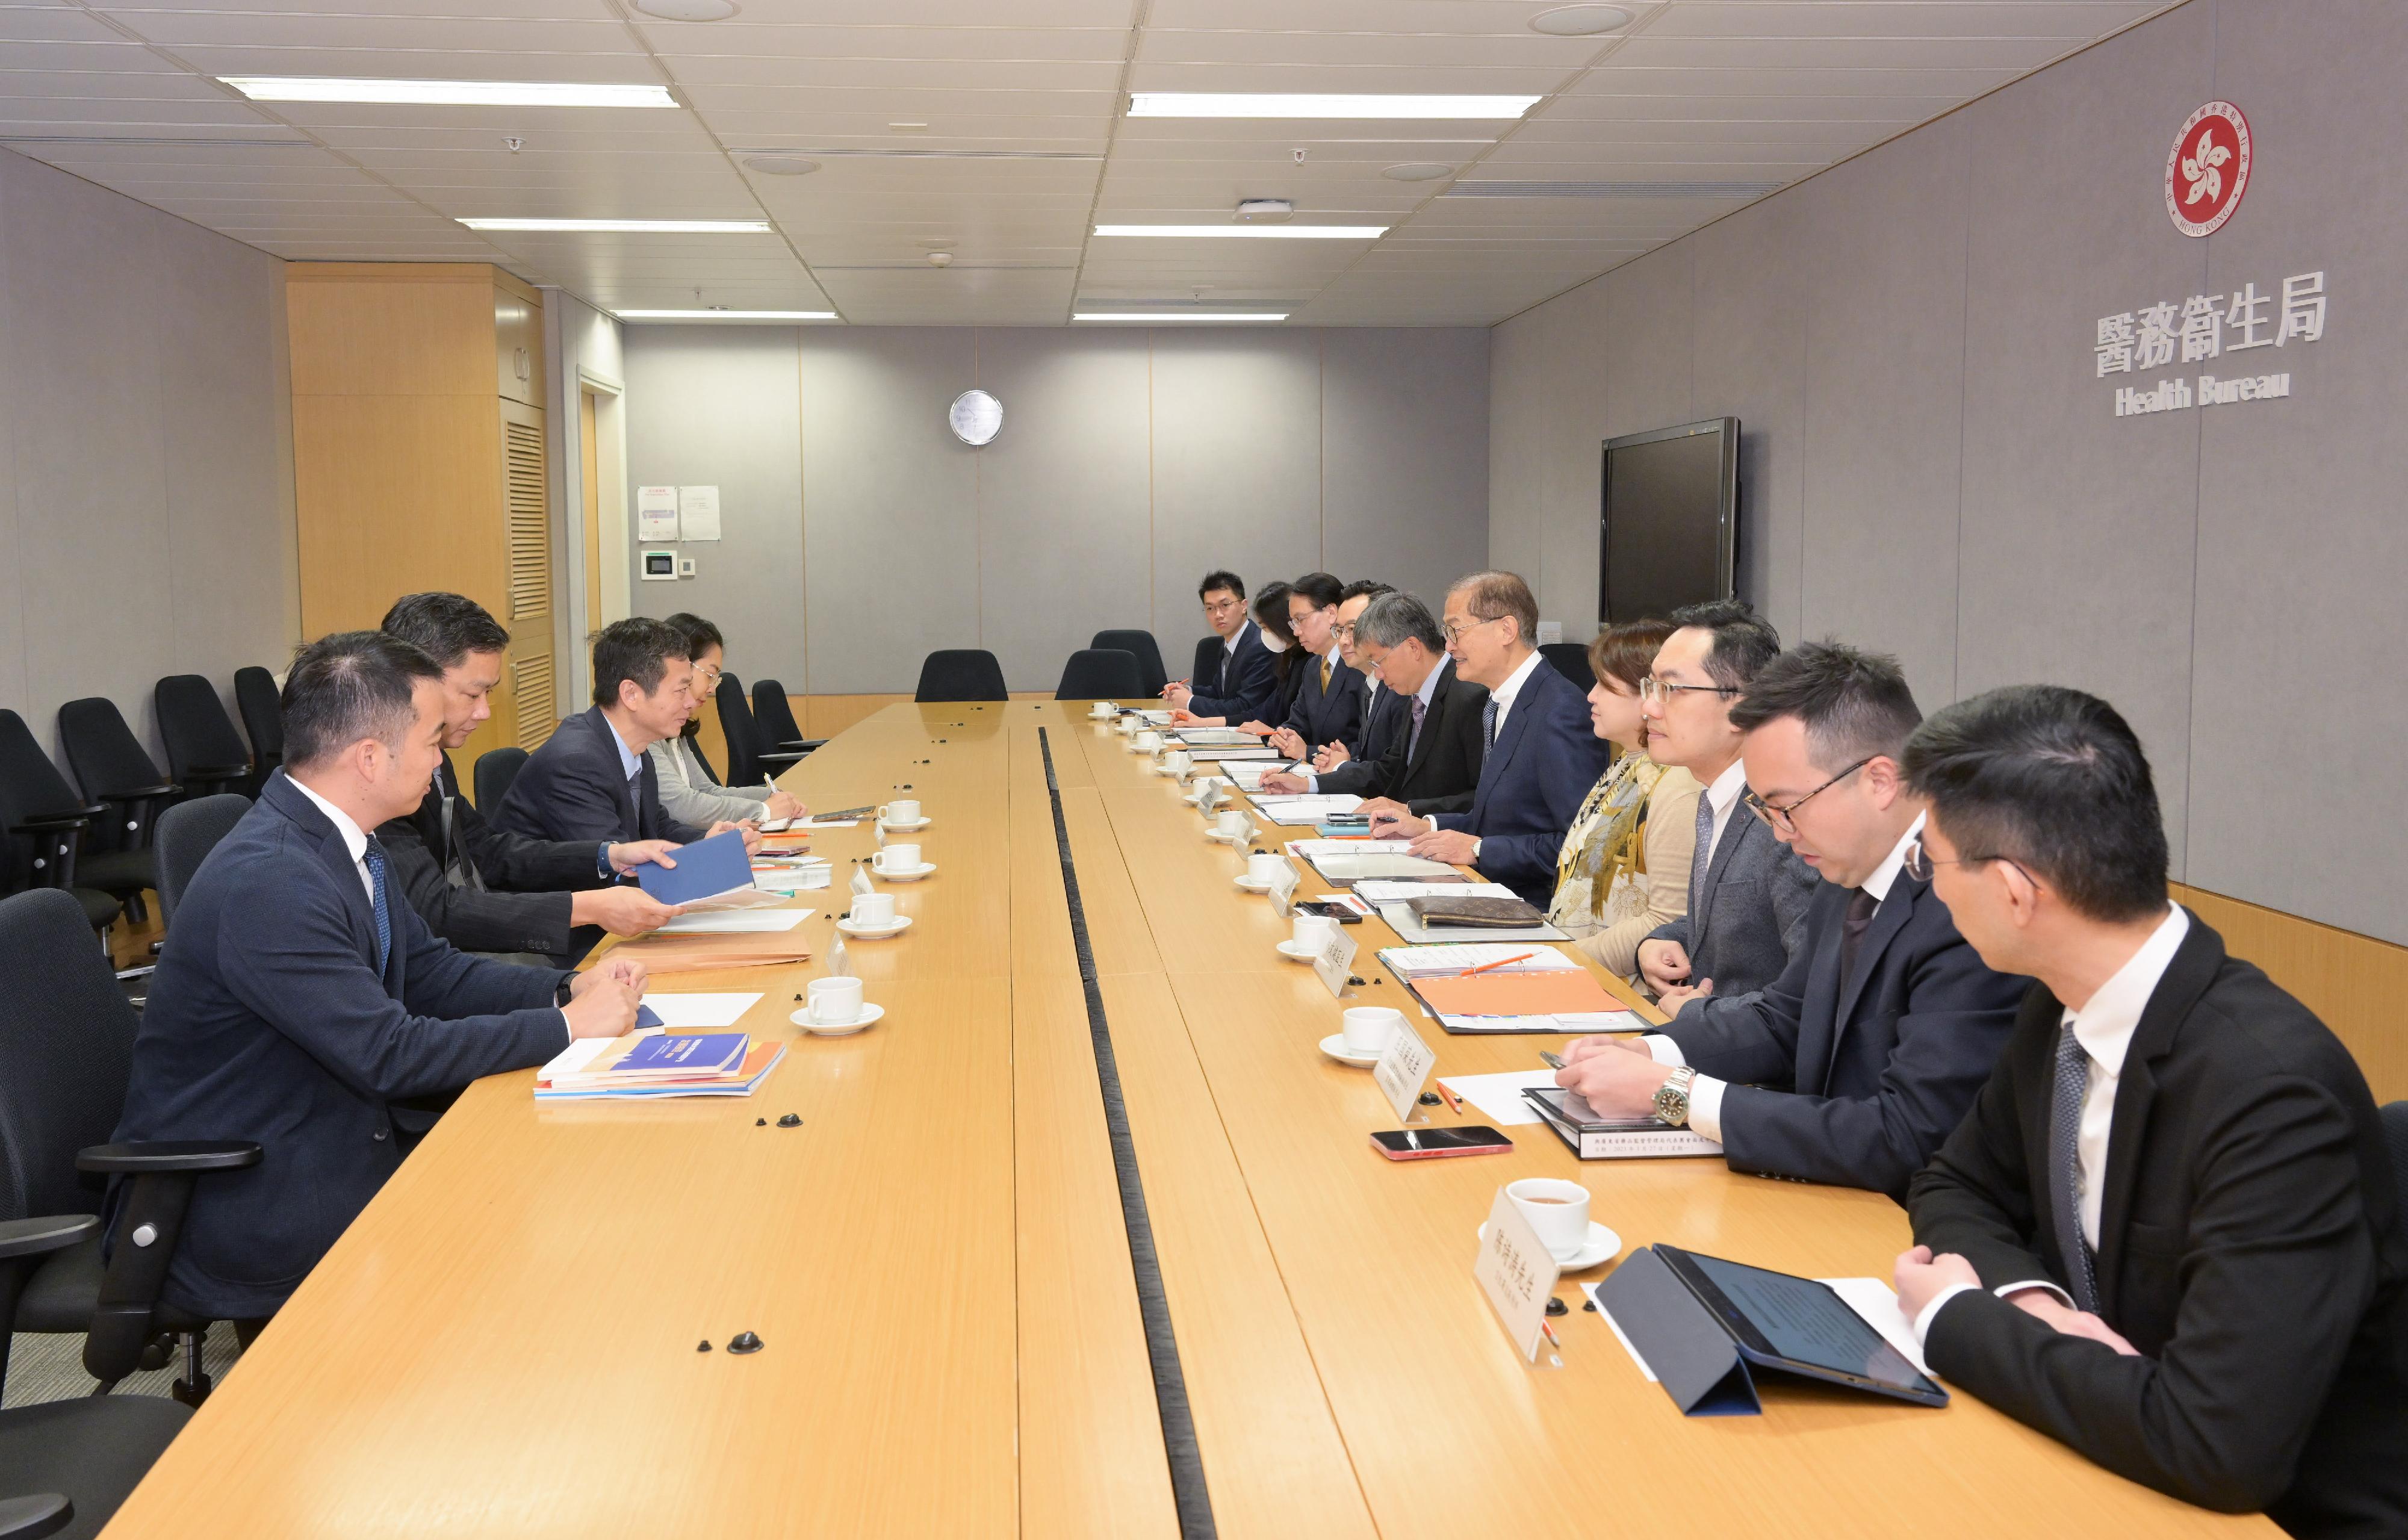 The Secretary for Health, Professor Lo Chung-mau (fifth right); the Permanent Secretary for Health, Mr Thomas Chan (sixth right); the Under Secretary for Health, Dr Libby Lee (fourth right); the Director of Health, Dr Ronald Lam (third right), and officers from the Health Bureau and the Department of Health met with a delegation of the Guangdong Provincial Medical Products Administration led by its General Director, Mr Jiang Xiaodong (third left), at the Central Government Offices today (March 27).